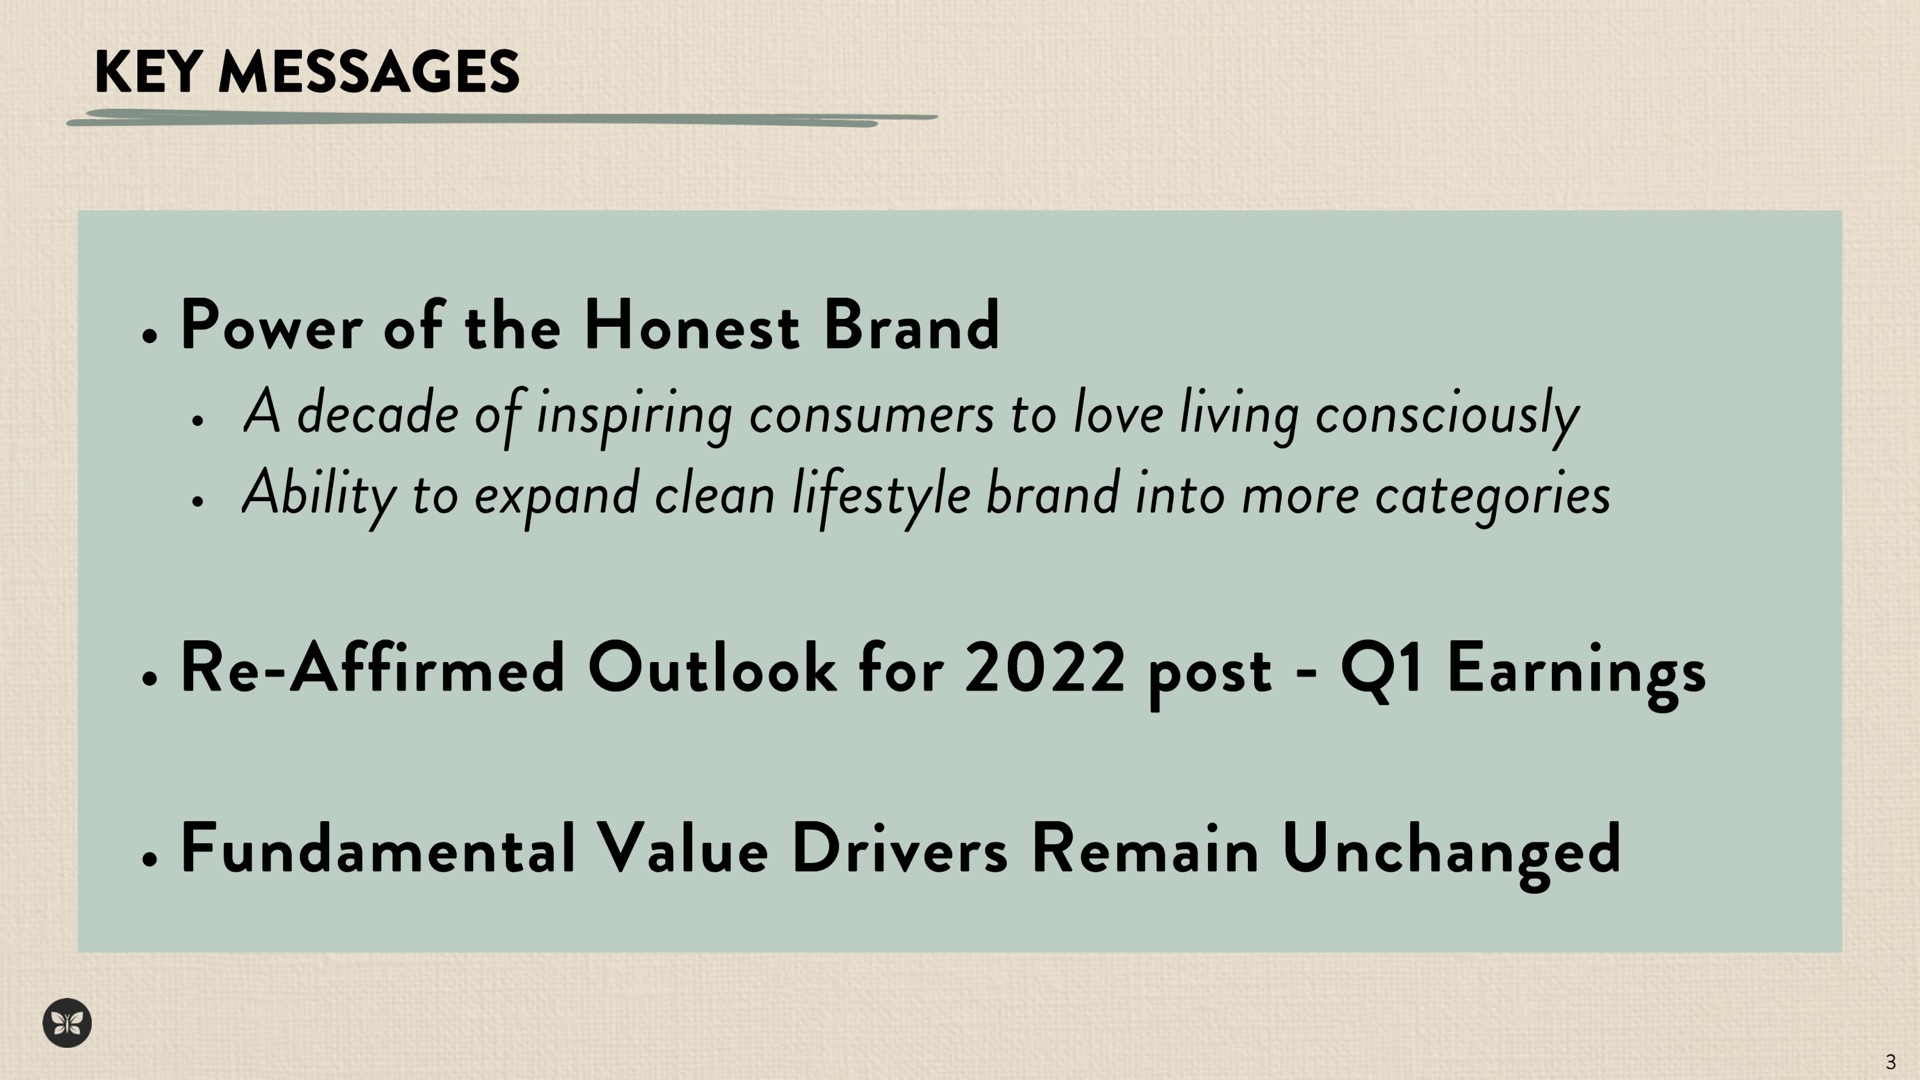 key messages power of the honest brand a decade of inspiring consumers to love living consciously ability to expand clean brand into more categories affirmed outlook for post earnings fundamental value drivers remain unchanged | Honest